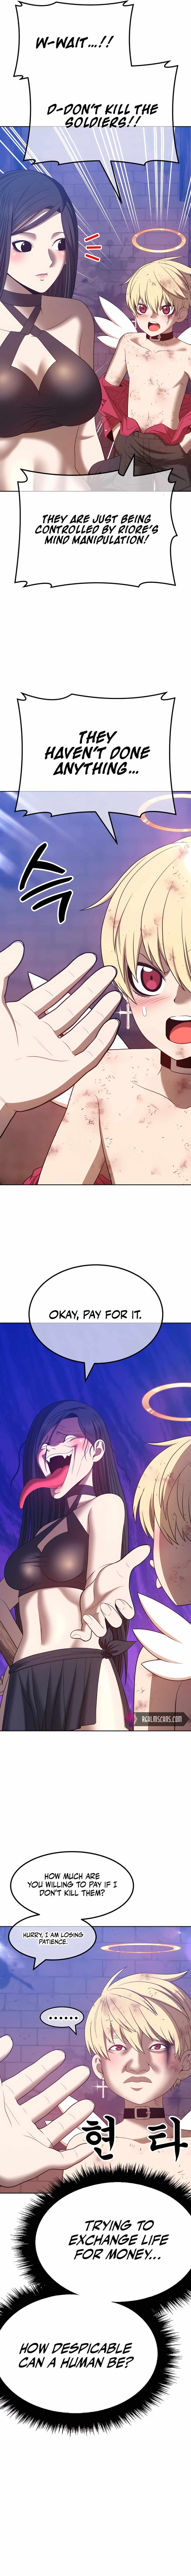 +99 Wooden stick Chapter 51 - page 31